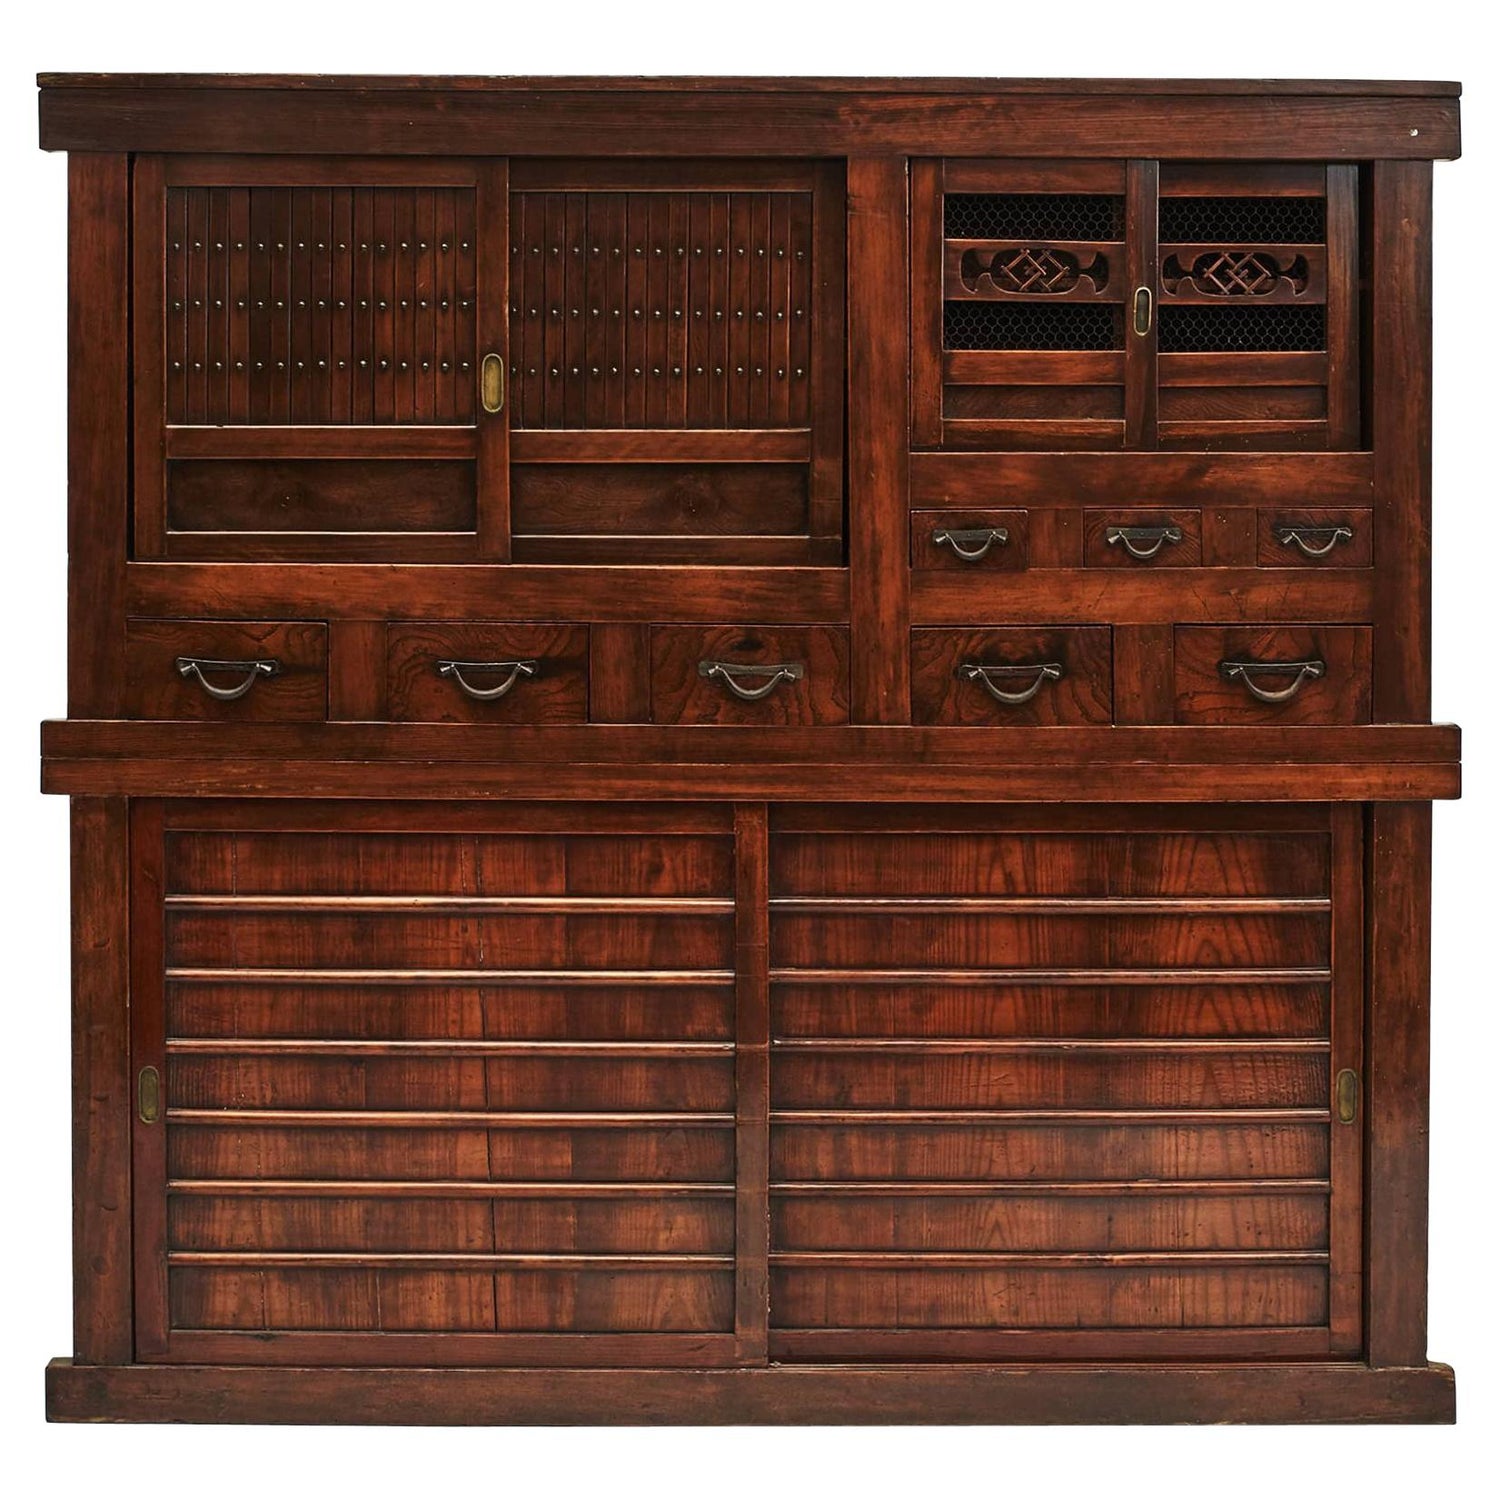 https://a.1stdibscdn.com/japanese-tansu-storage-cabinet-with-sliding-doors-meiji-periode-for-sale/1121189/f_244019321625512625279/24401932_master.jpg?width=1500